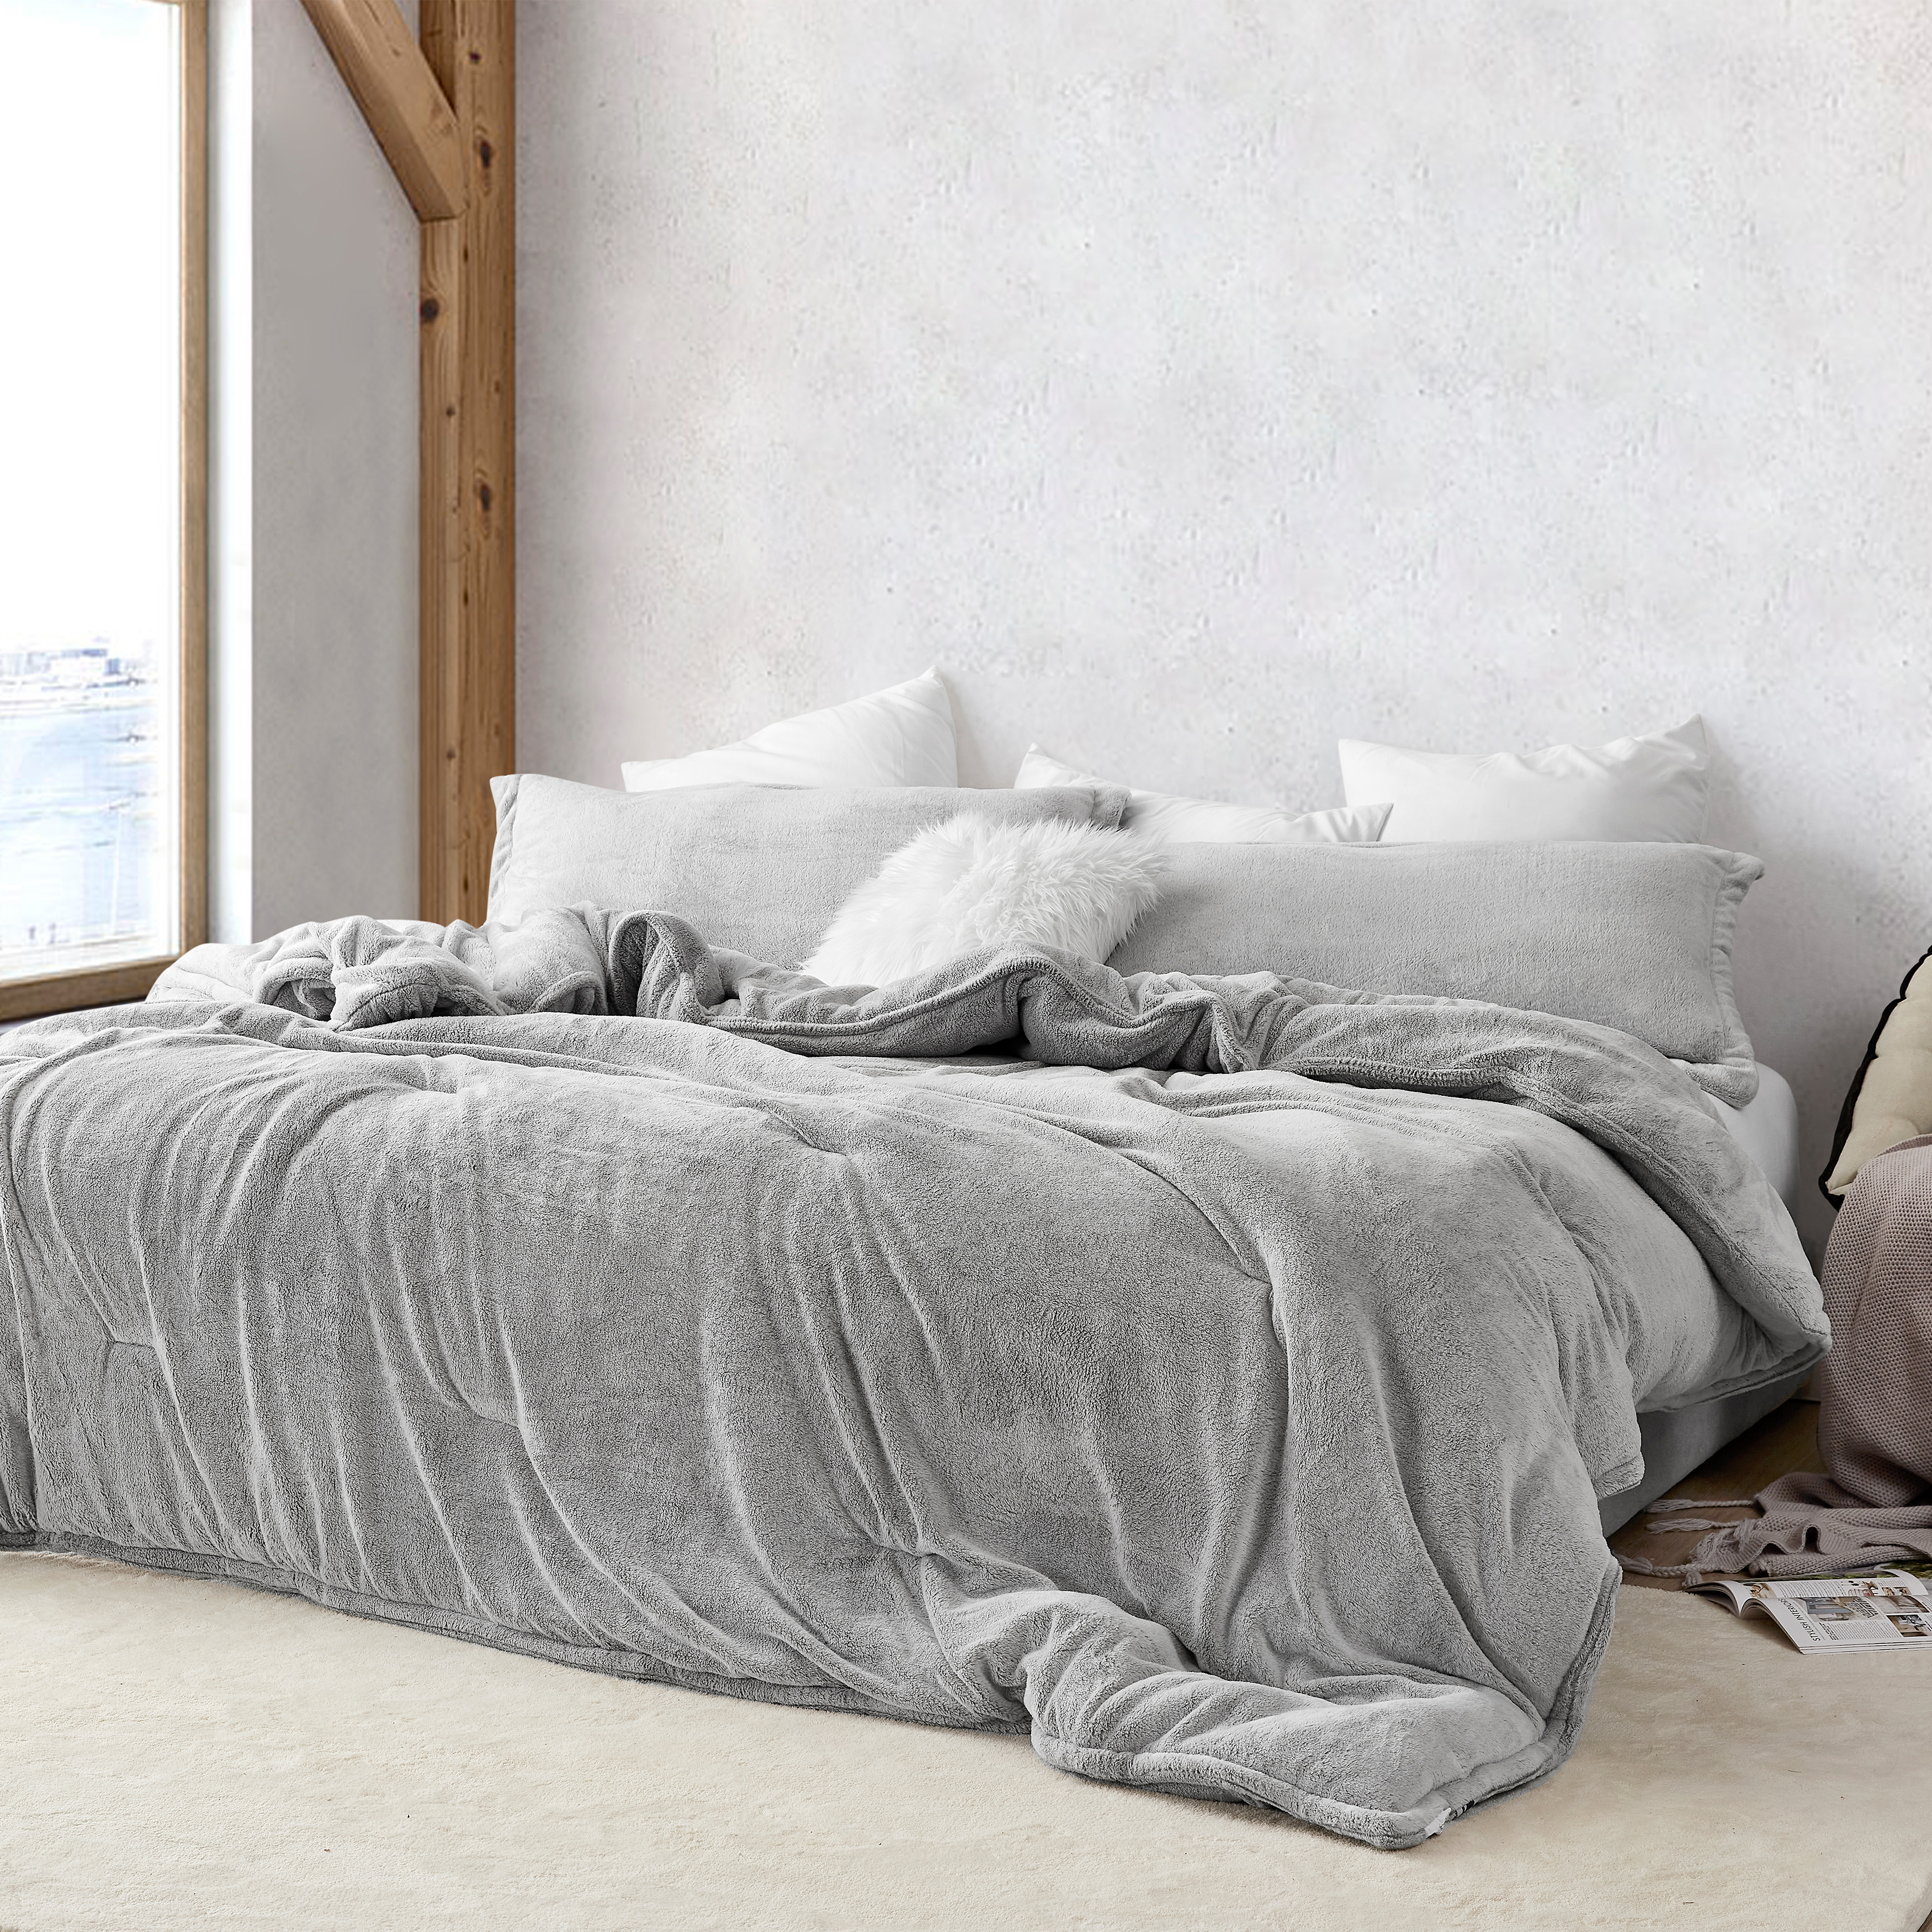 Coma Inducer® Oversized King Comforter - Frosted Taupe